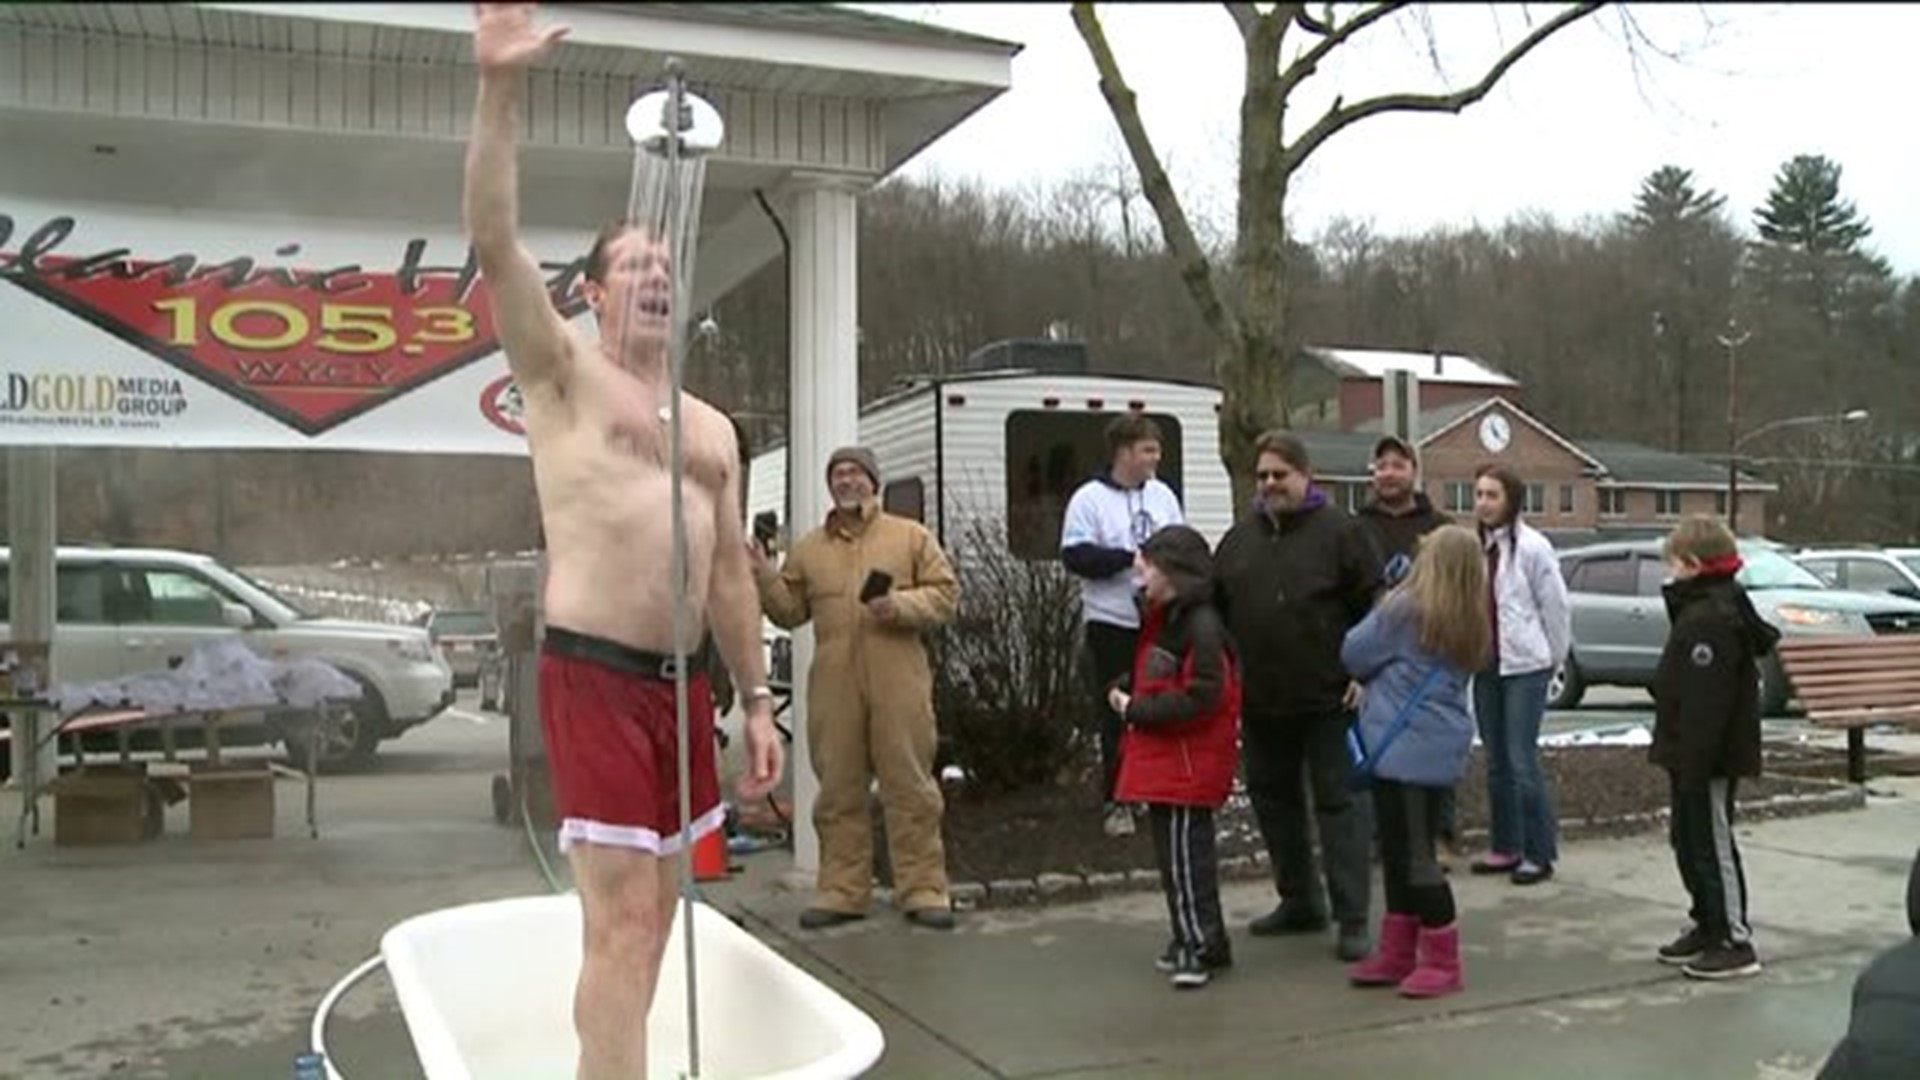 Shivering and Showering for Charity